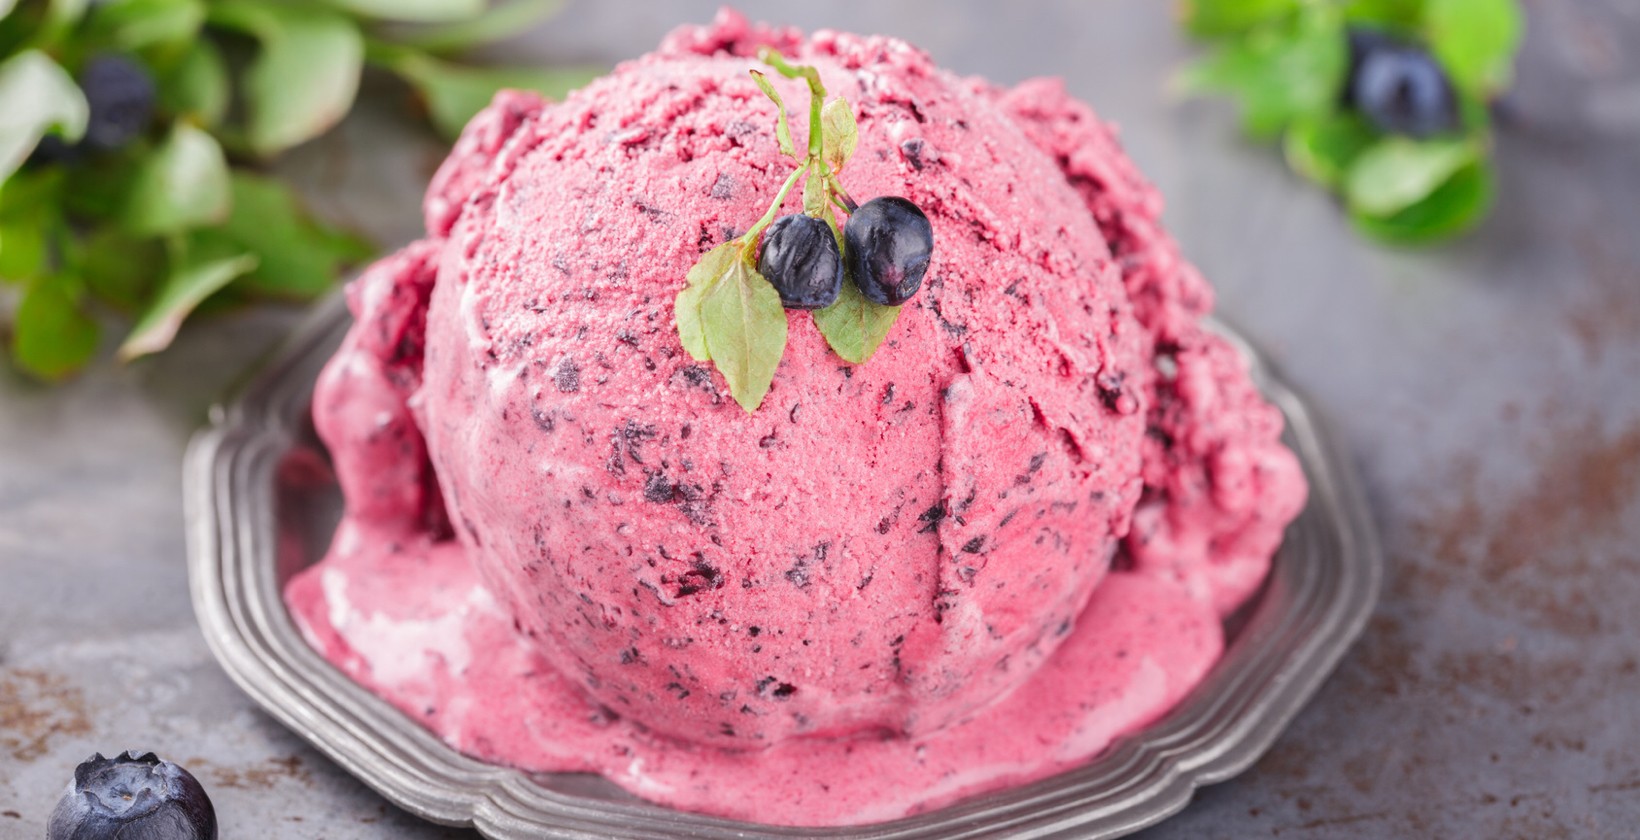 Ice cream with blueberries in a vintage metal ware